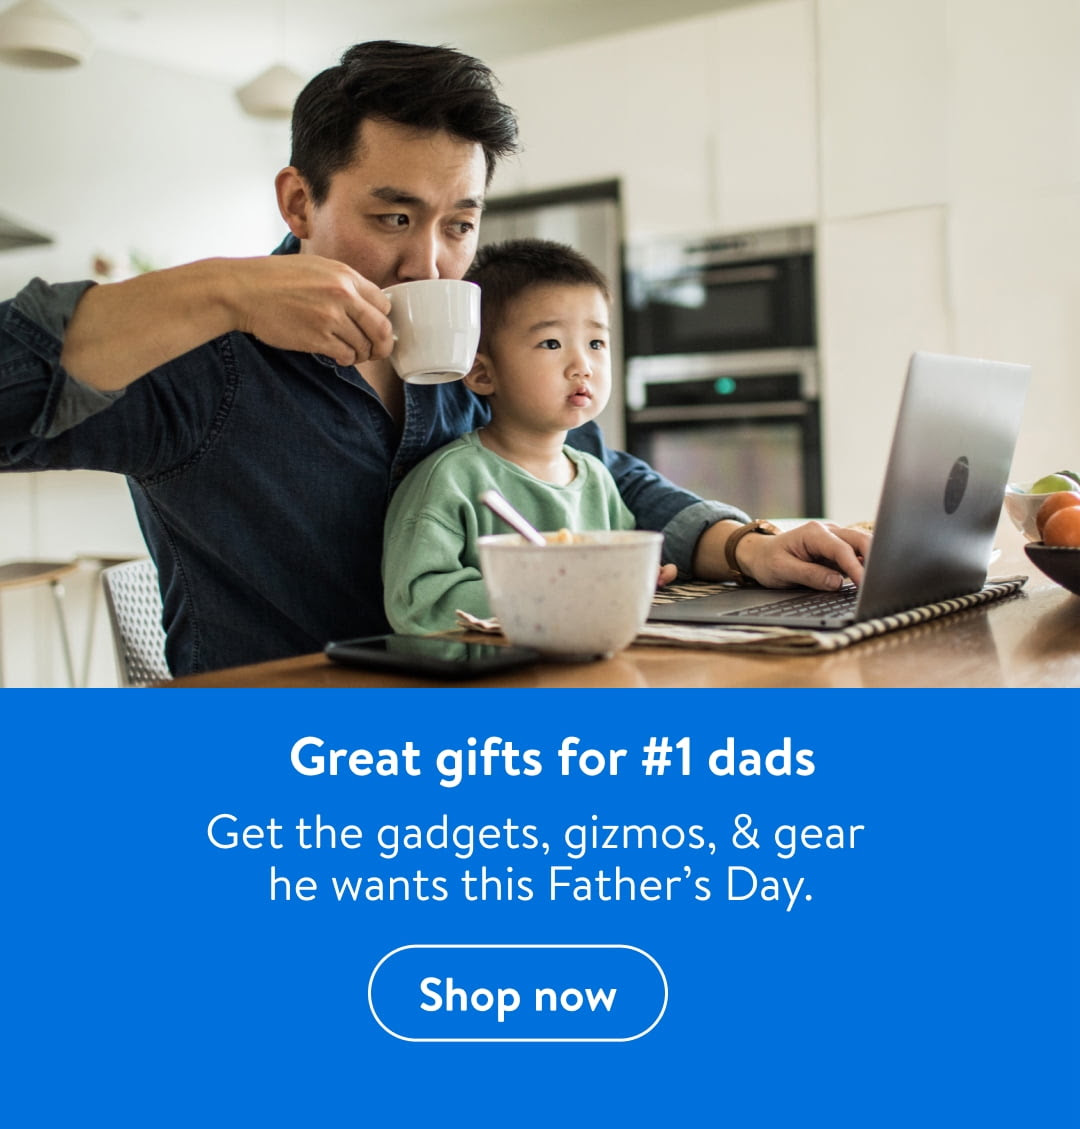 Get the gadgets, gizmos, & gear he wants this Father’s Day. 